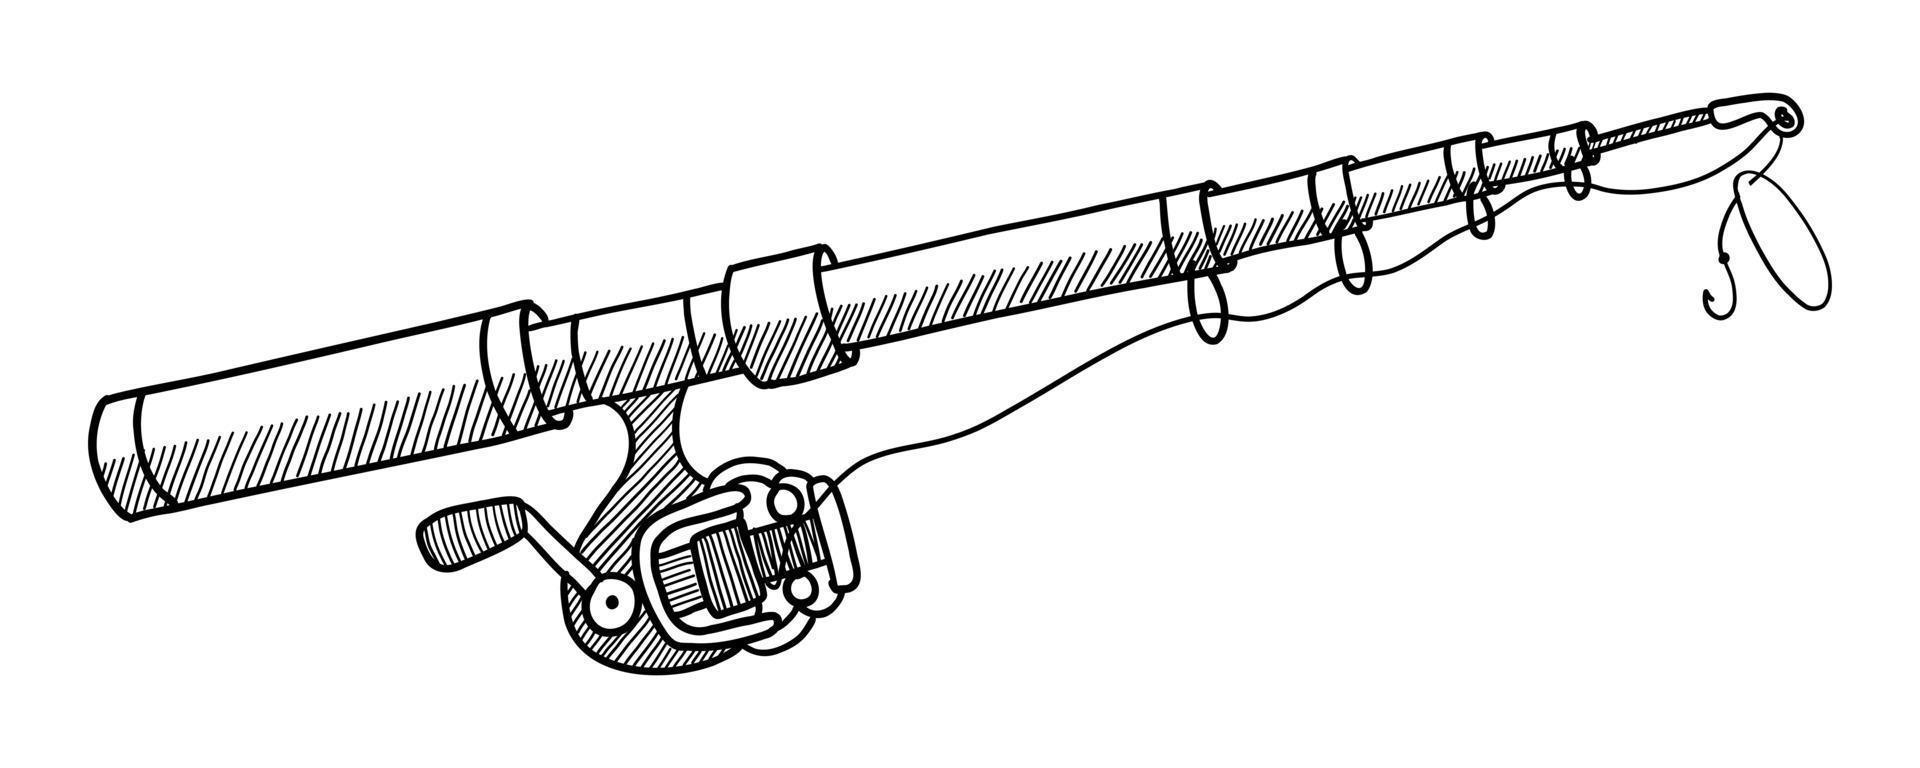 VECTOR FISHING ROD ISOLATED ON A WHITE BACKGROUND. DOODLE DRAWING BY HAND